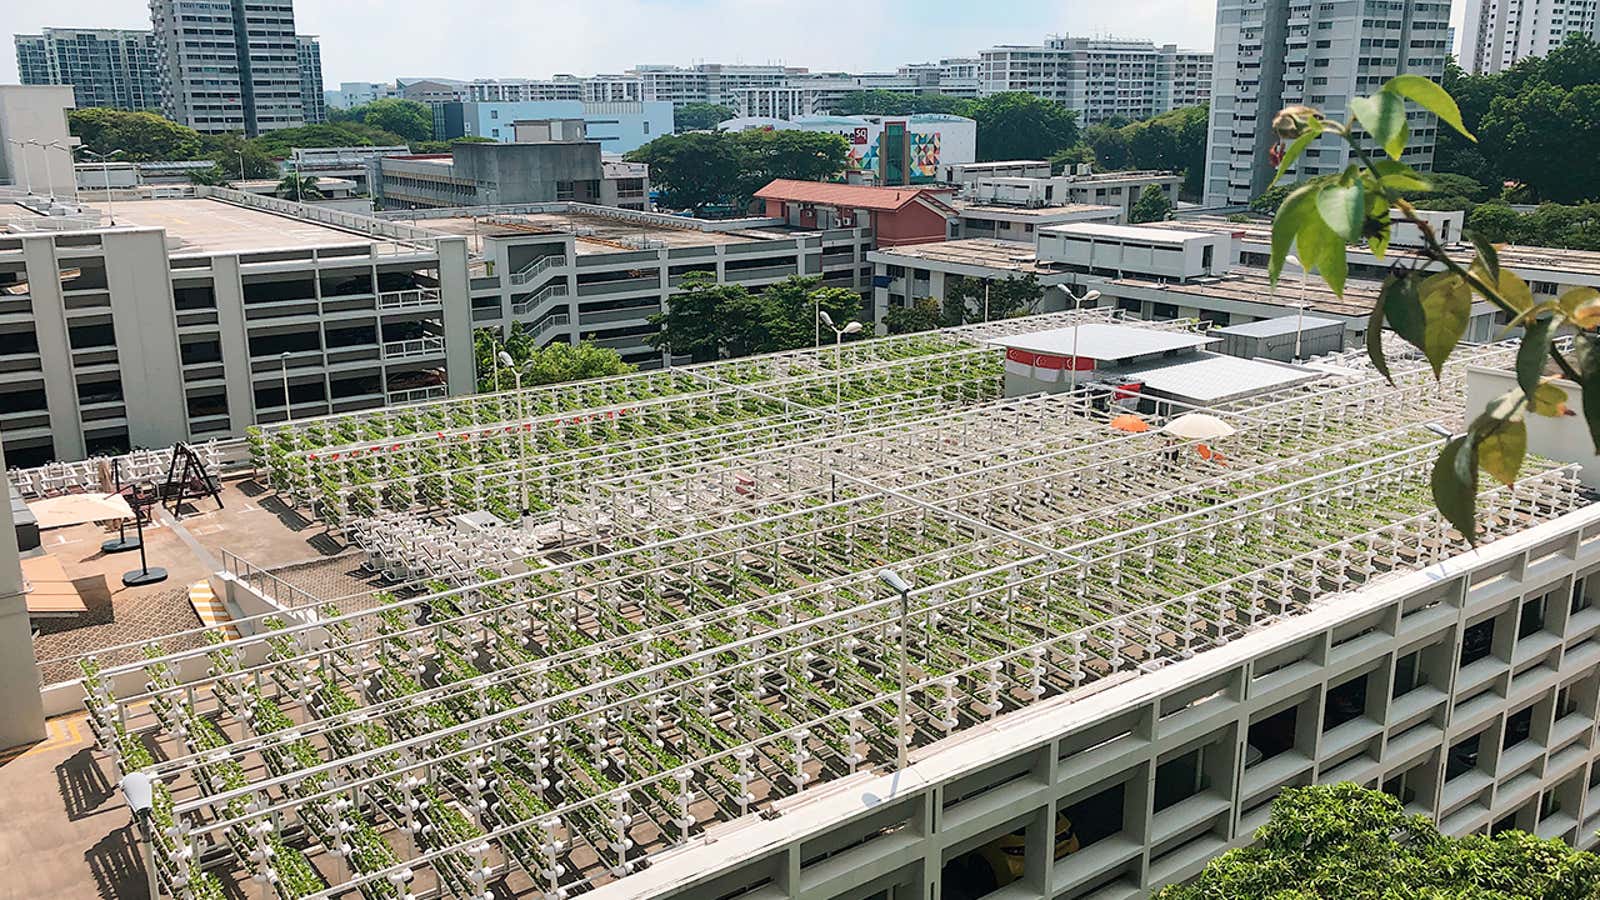 Singapore aims to produce 30% of its food by 2030.